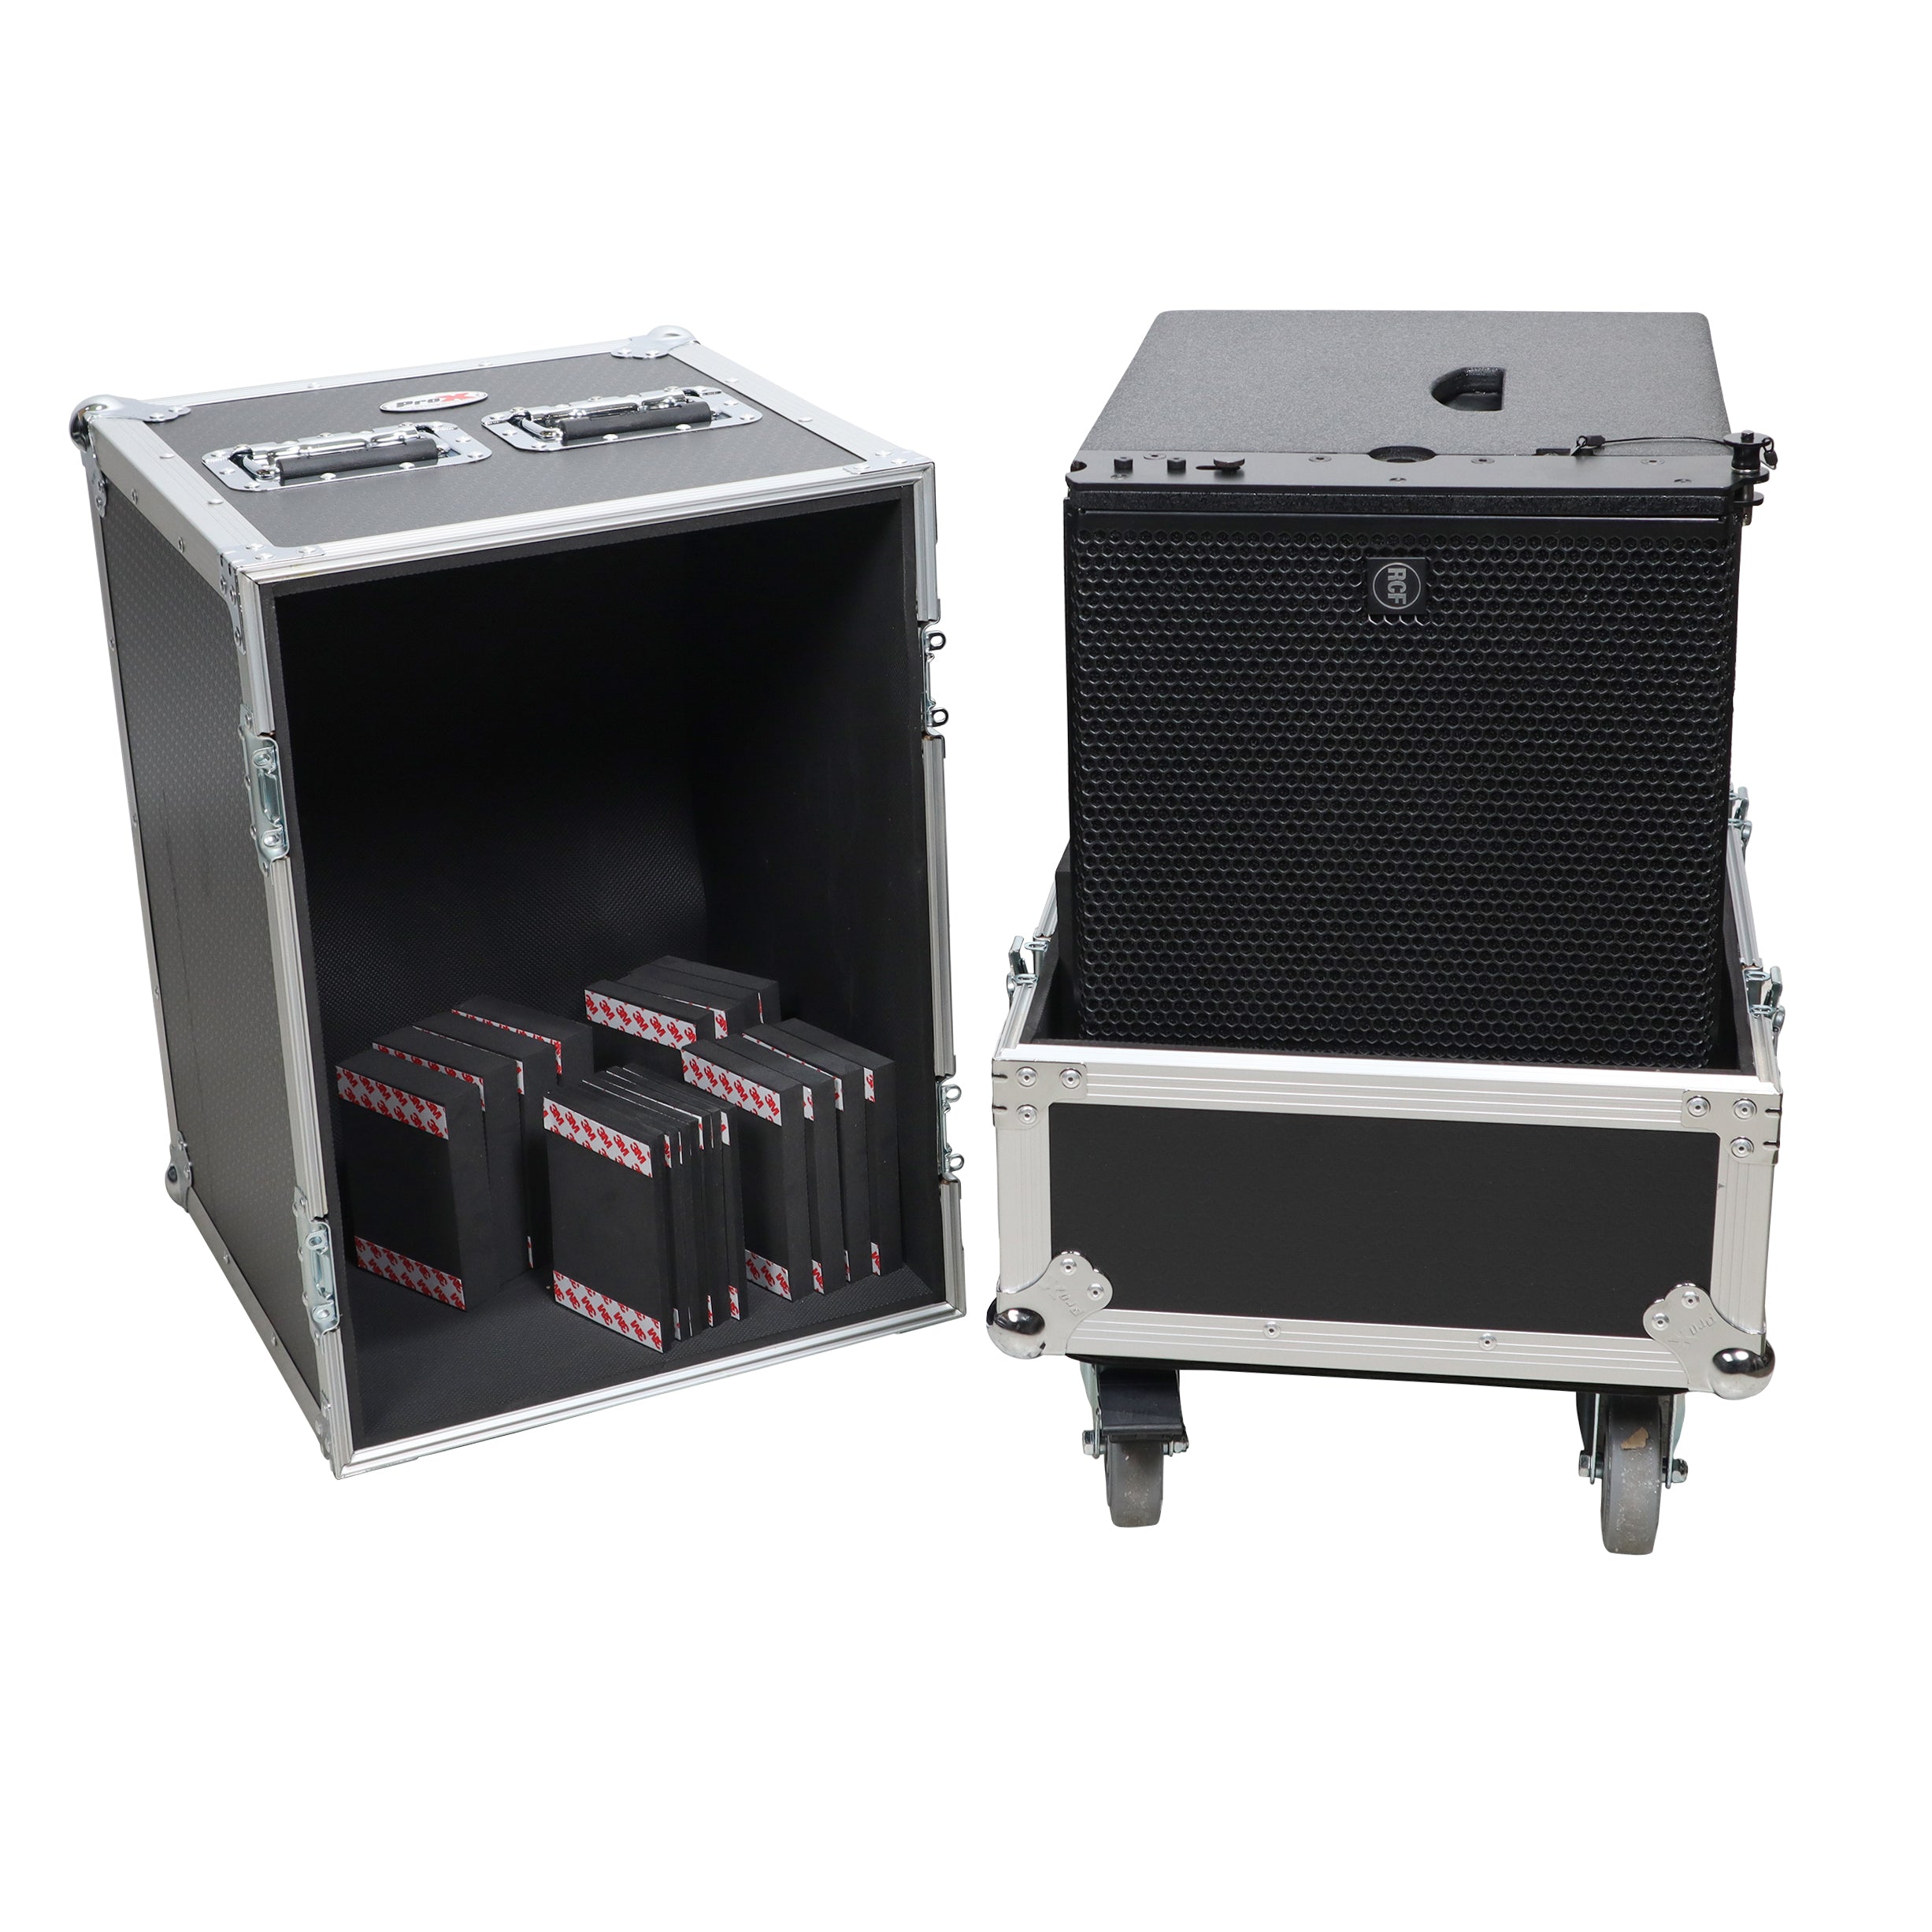 Pro X Universal ATA Single Line Array Flight Case For RCF SUB702AS Subwoofer Speaker and similar size 21x21x15 in. XS-SP212115W